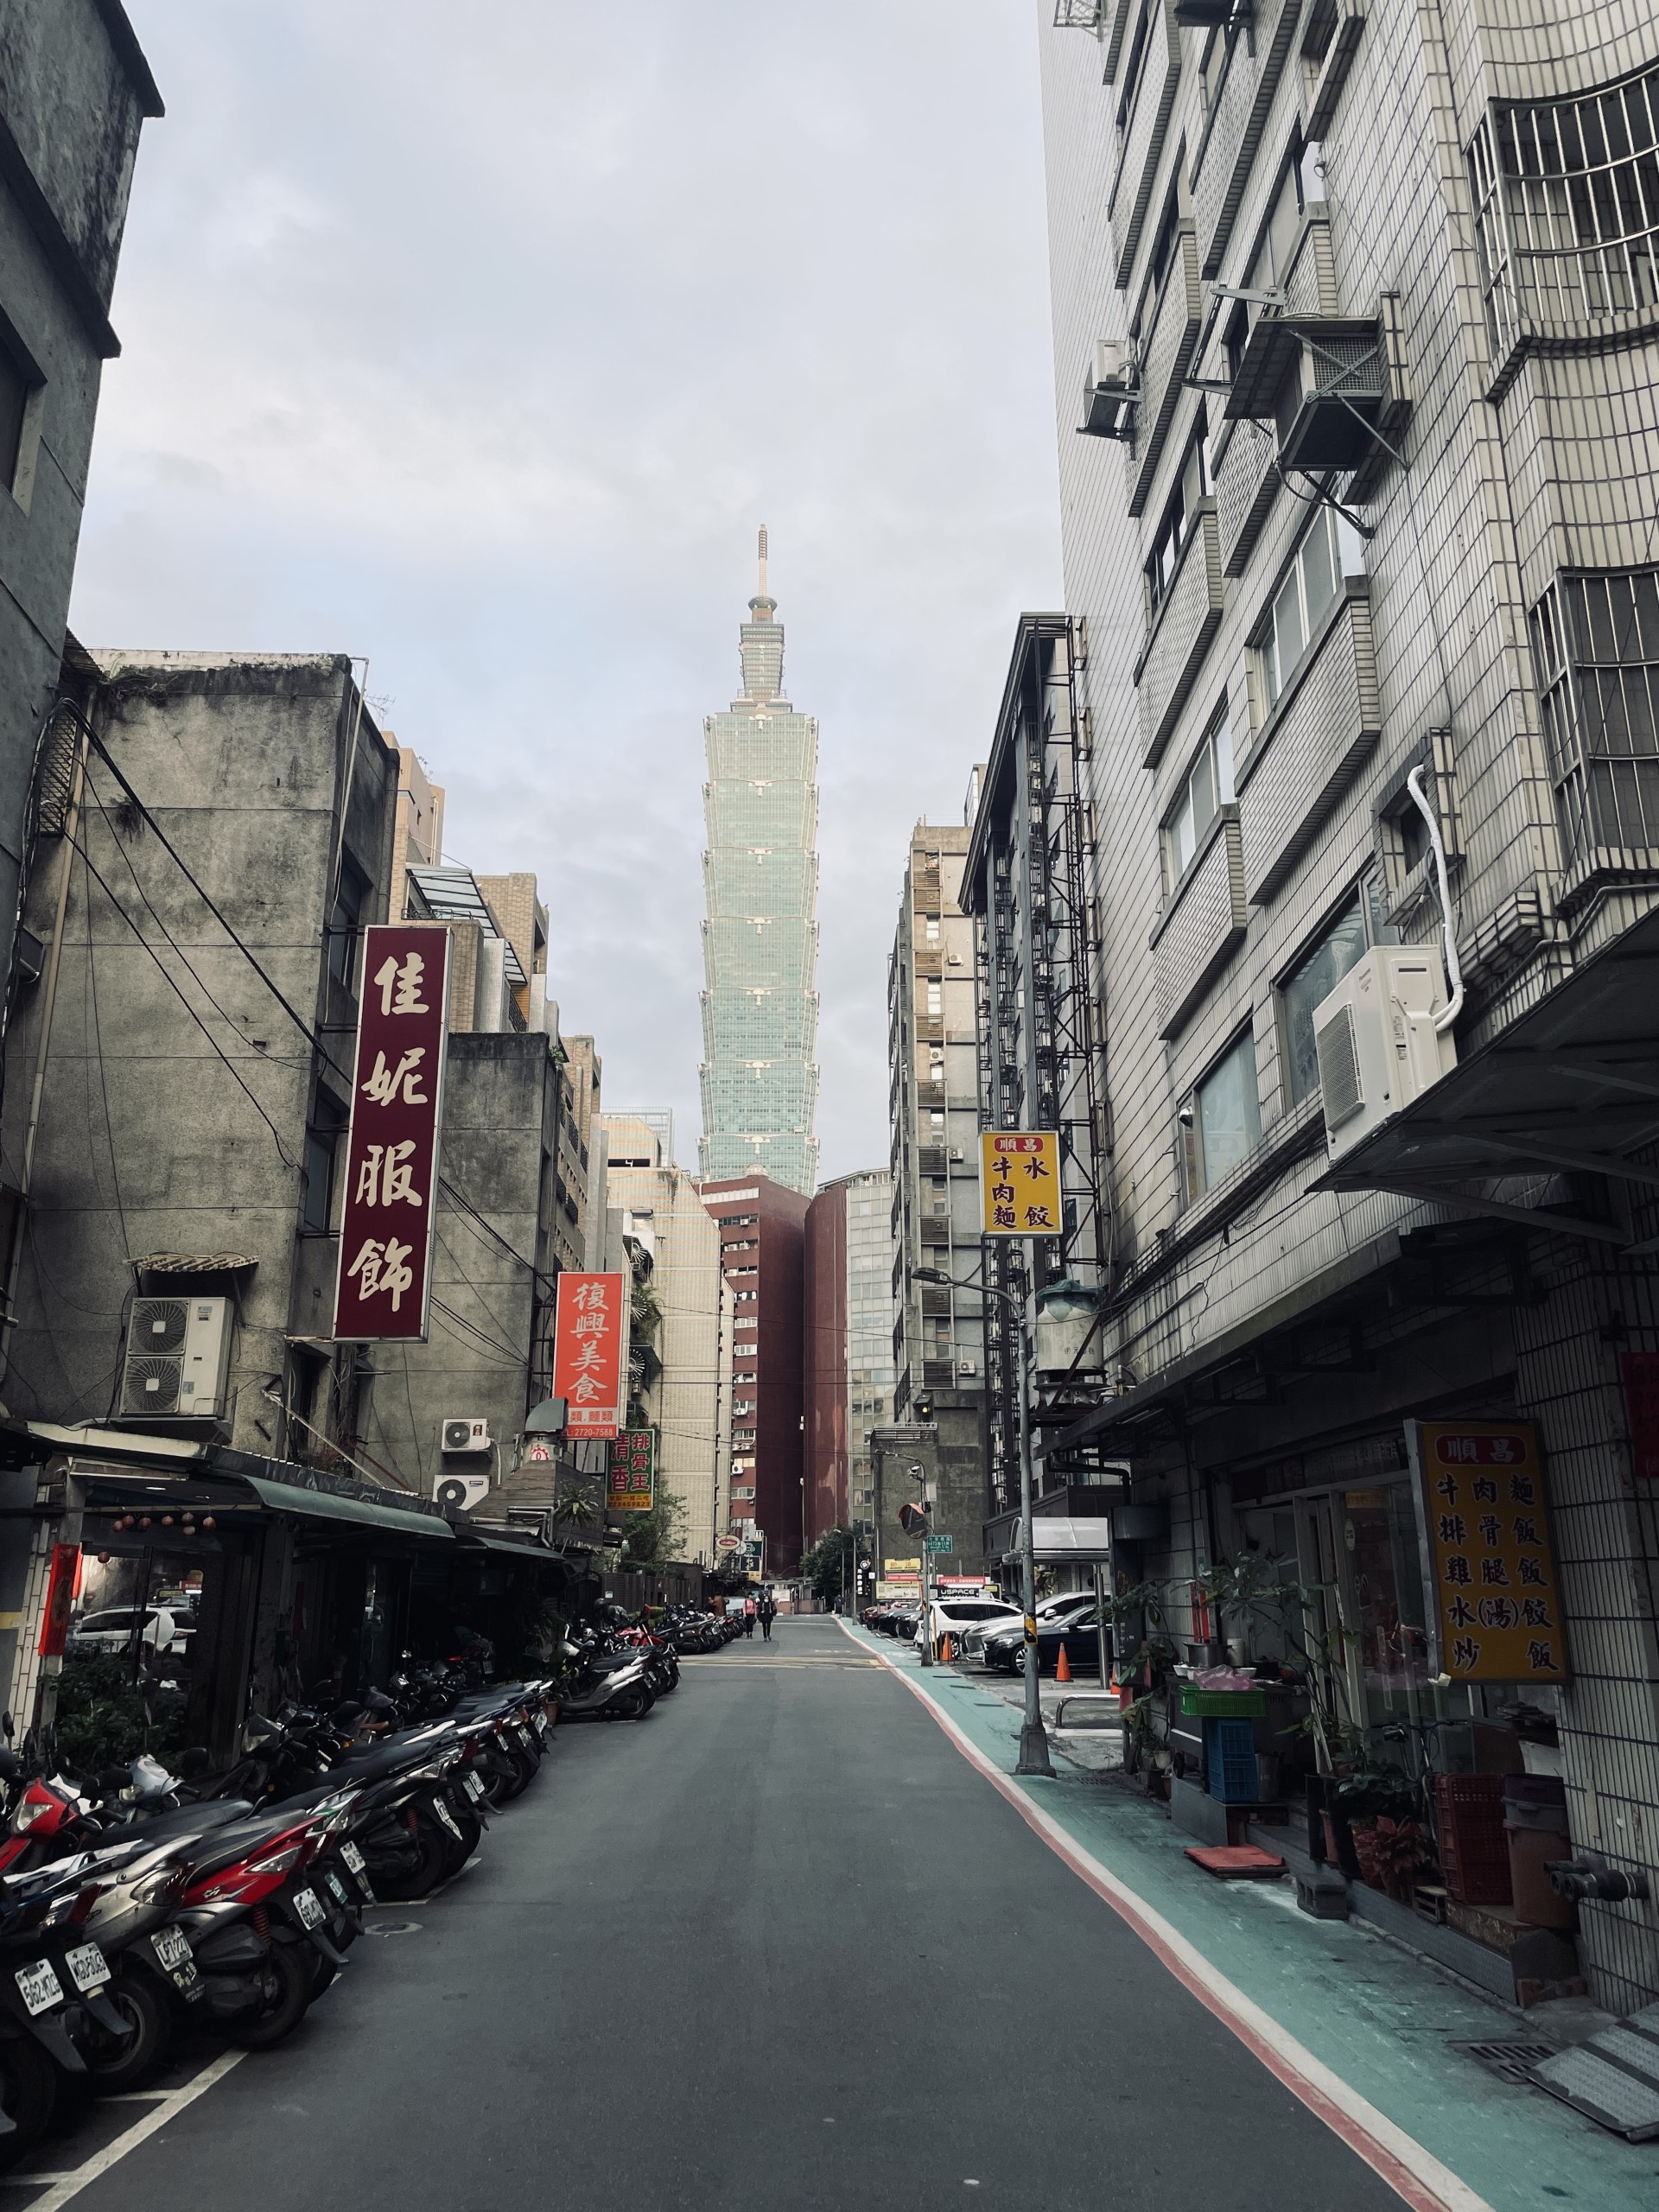 Alley View of Taipei 101